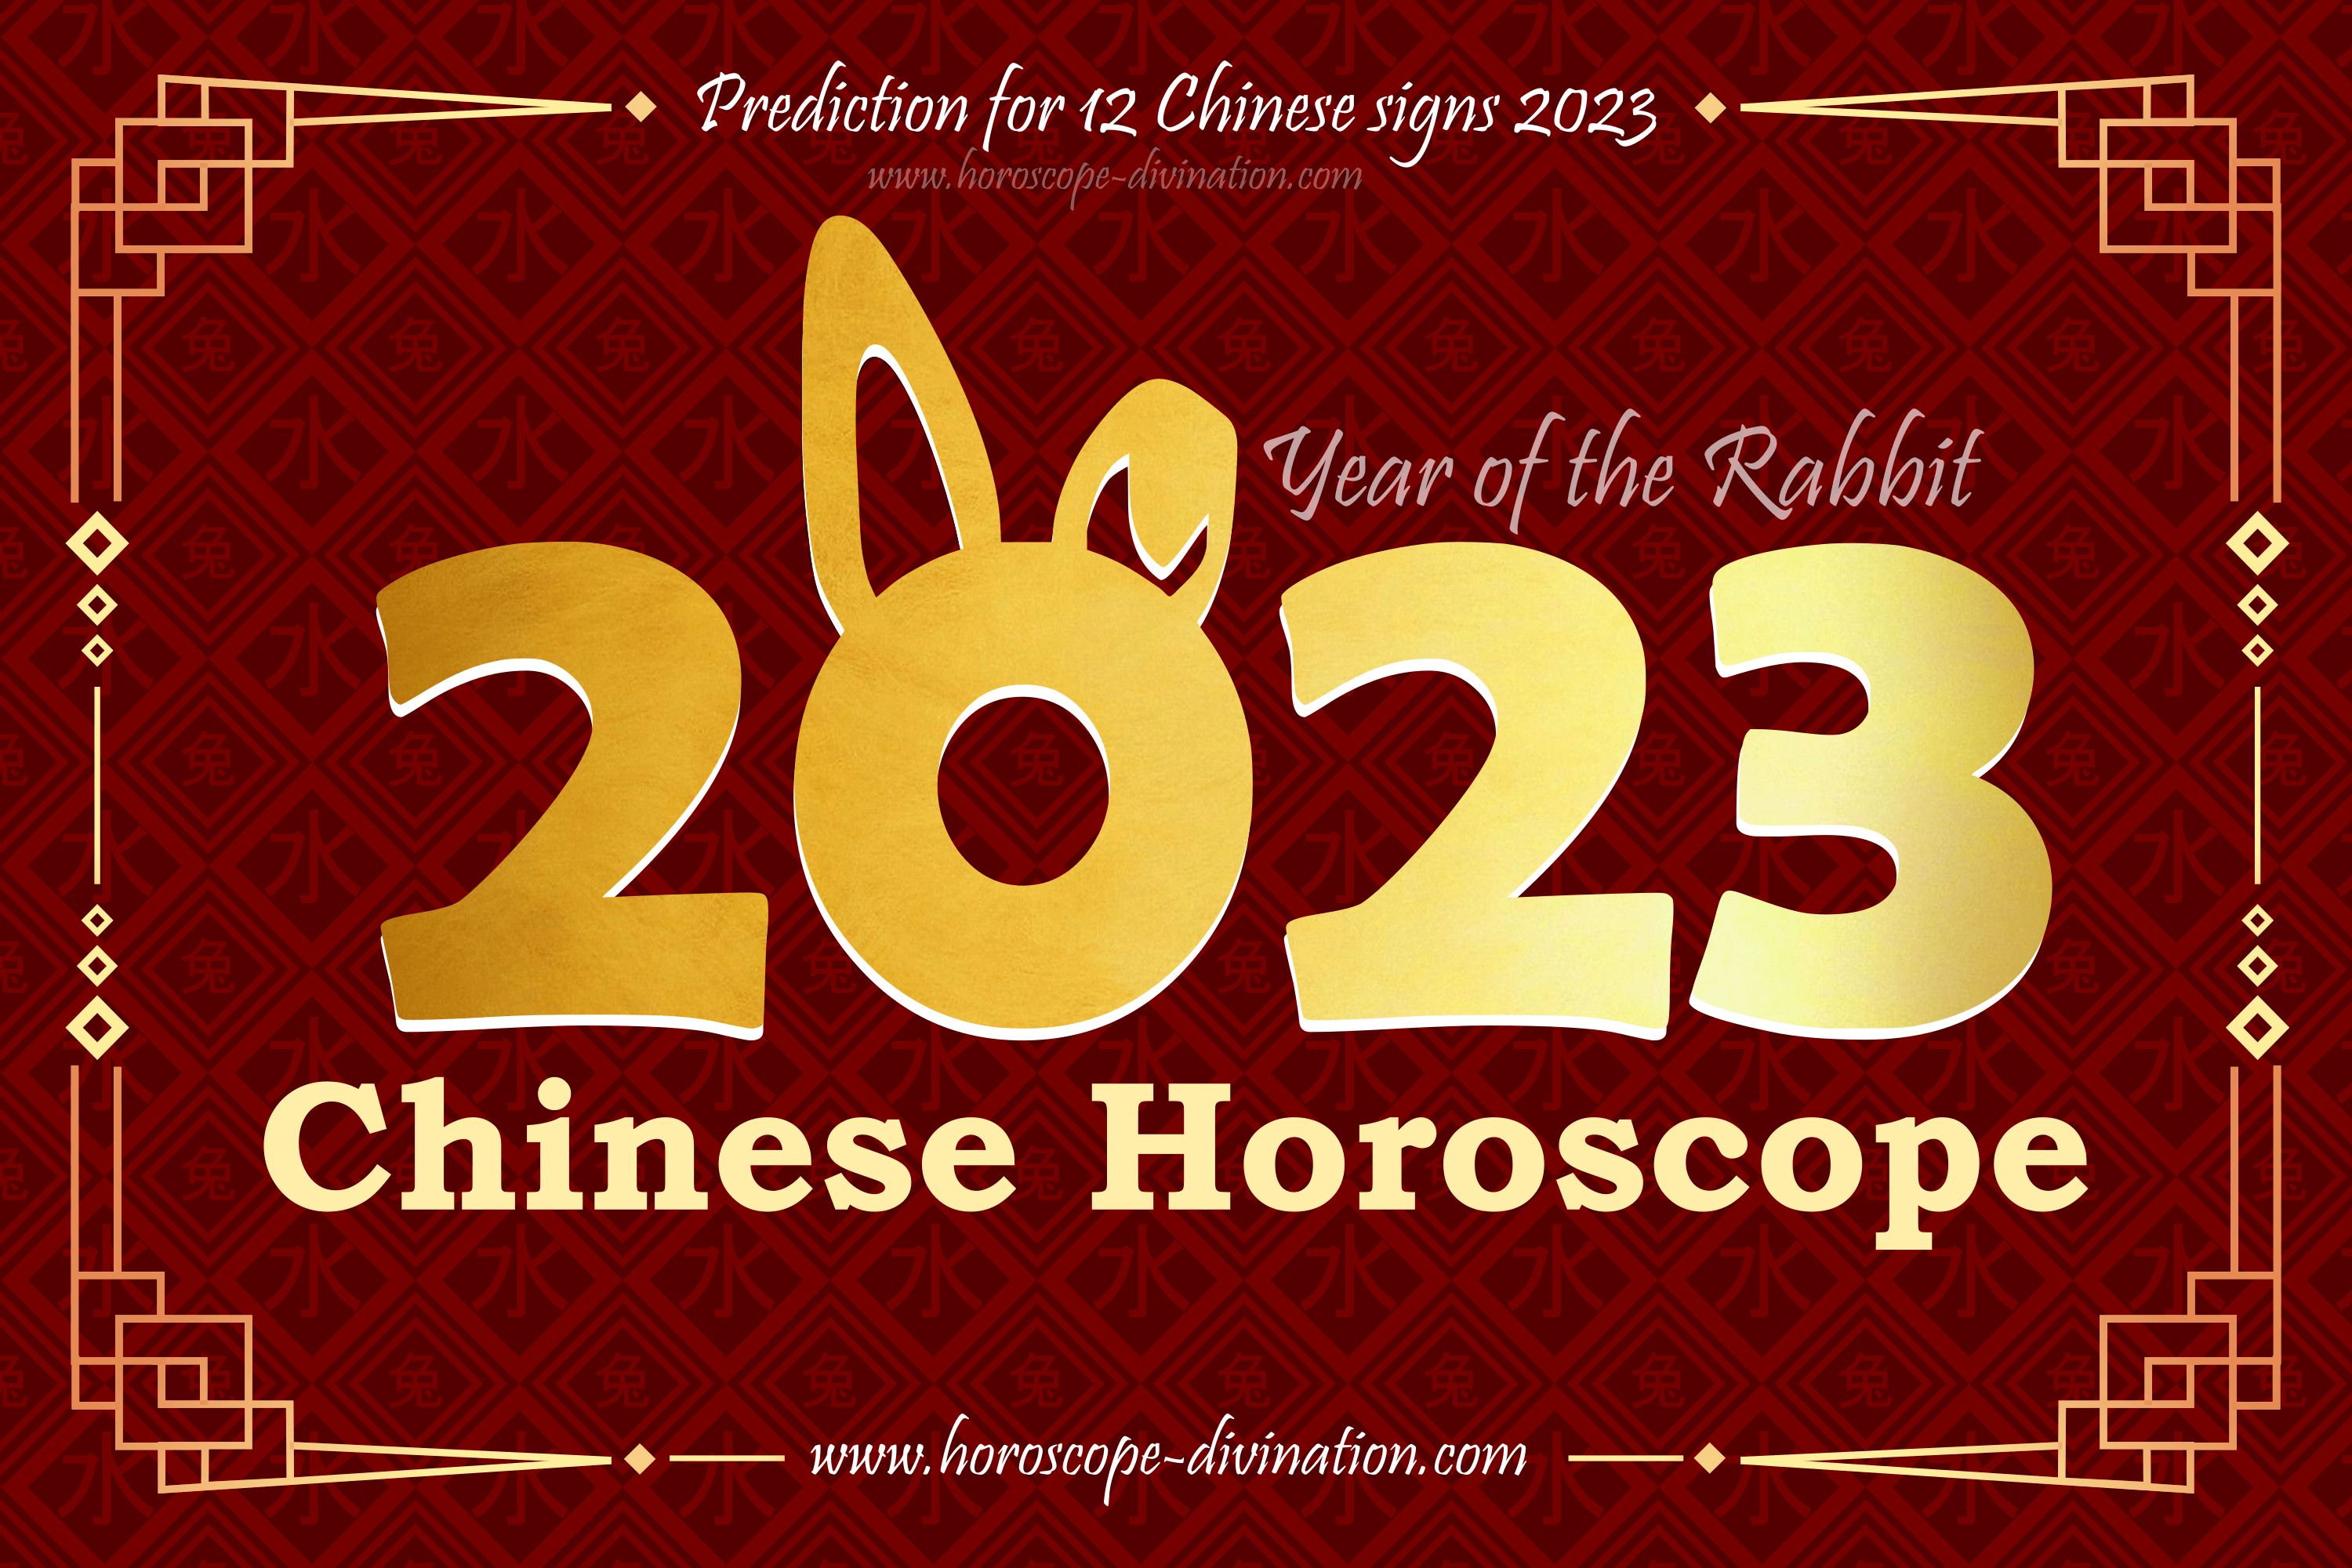 Chinese zodiac fortune predictions for 2023